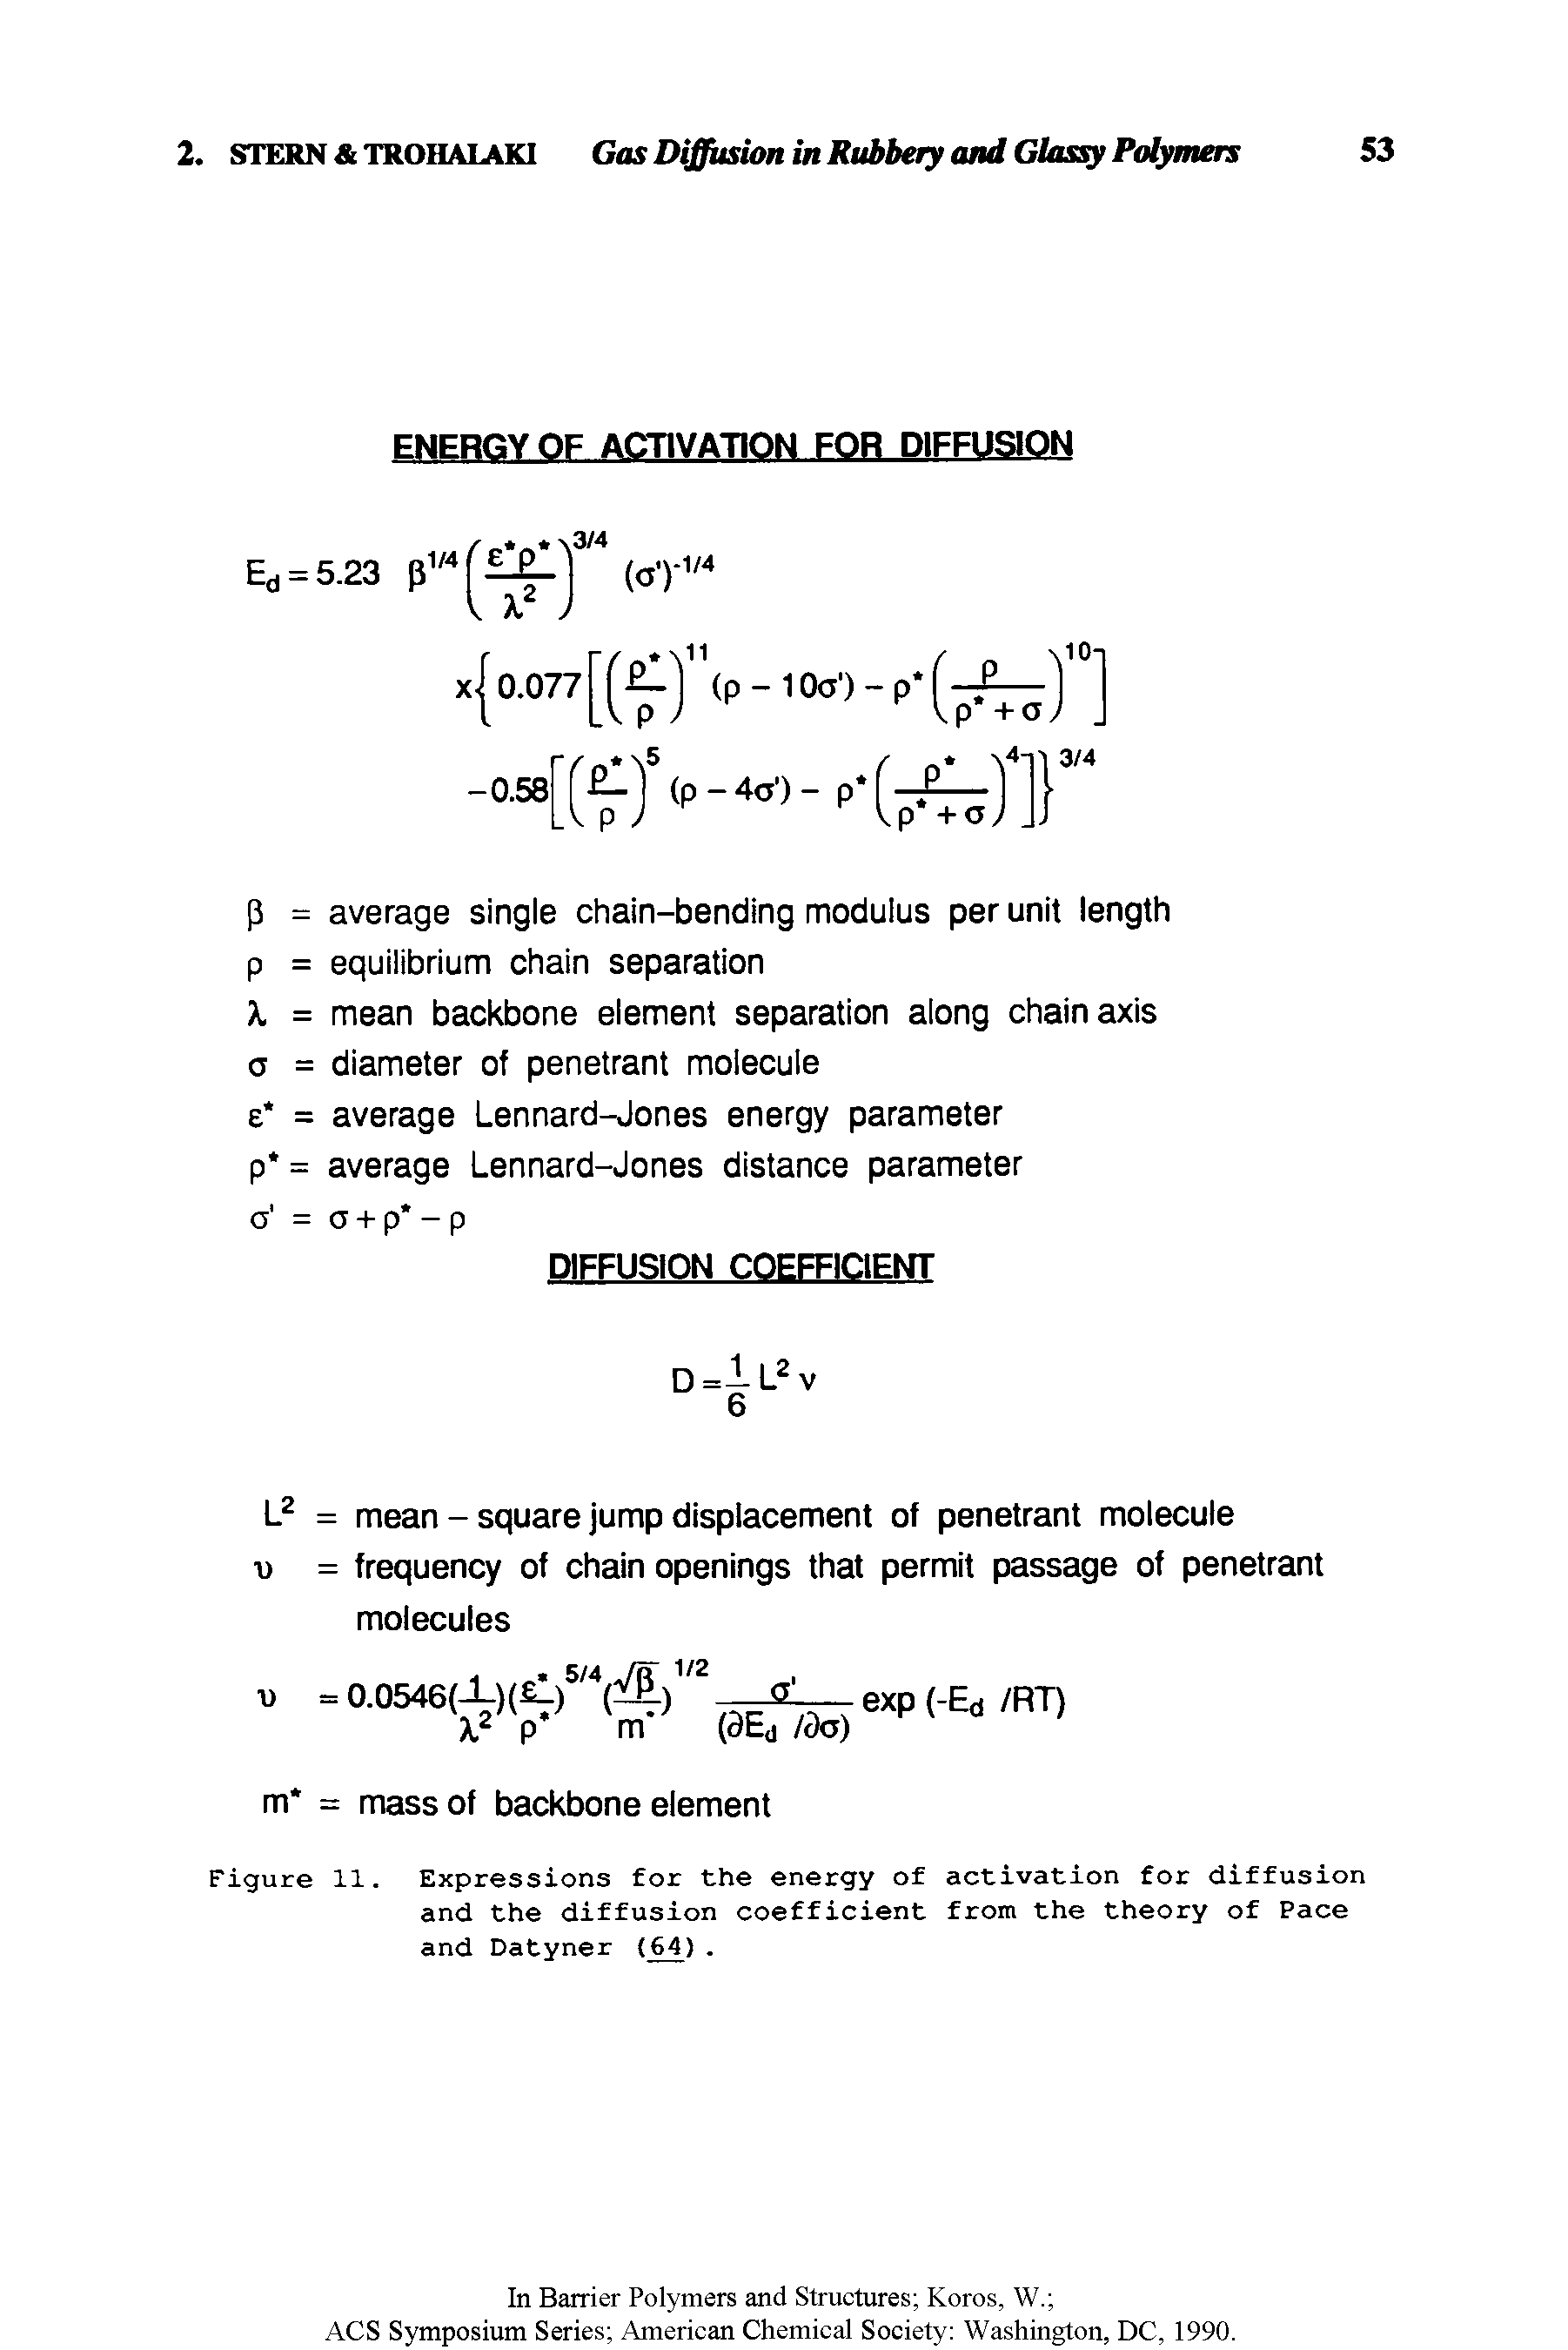 Figure 11. Expressions for the energy of activation for diffusion and the diffusion coefficient from the theory of Pace and Datyner (64).